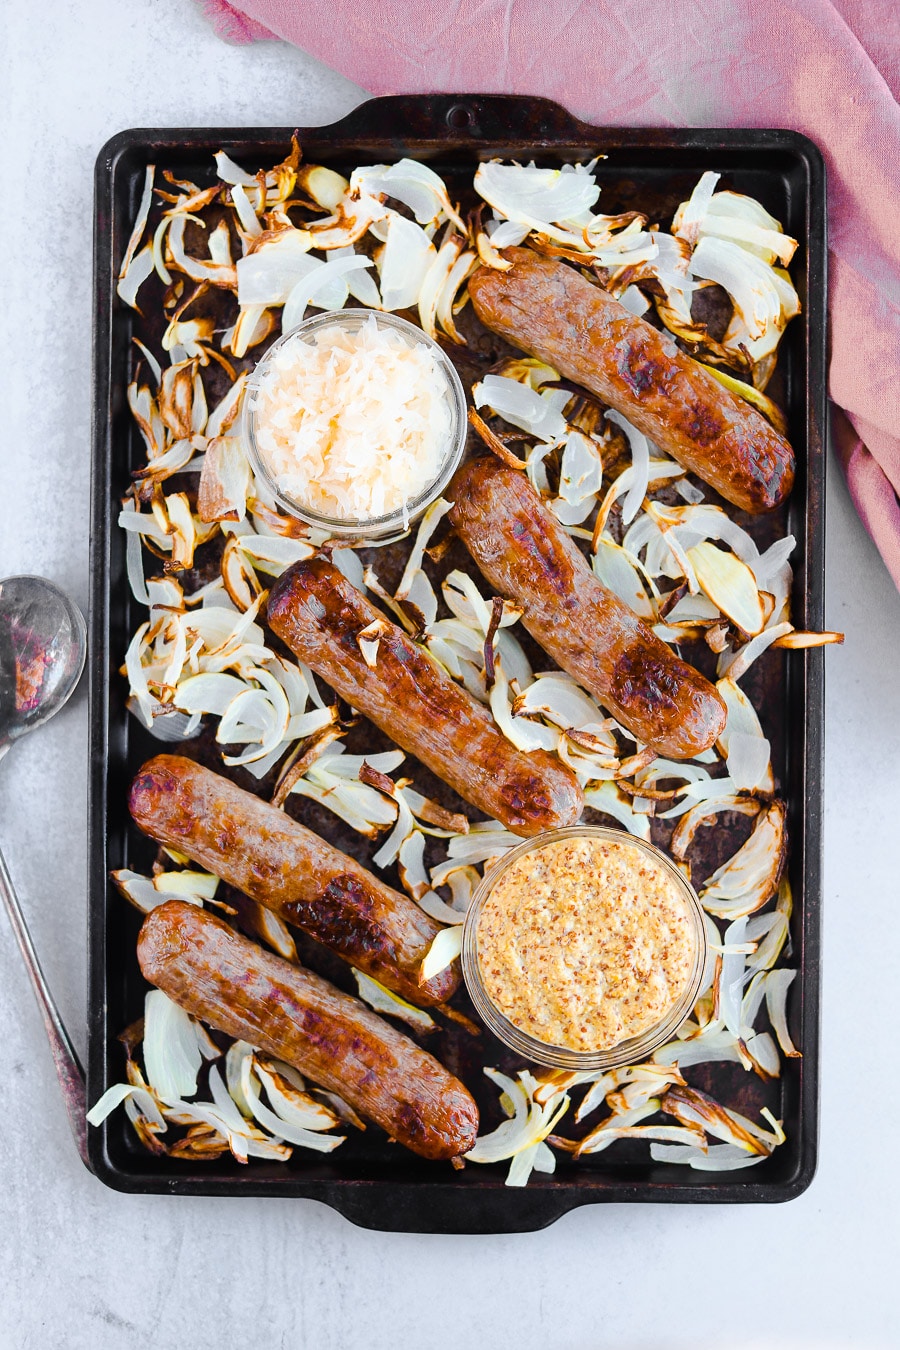 These brats in the air fryer are such a quick and easy way to cook brats! Not to mention, I make these with sliced onions so you get a delicious one-basket air fryer meal.